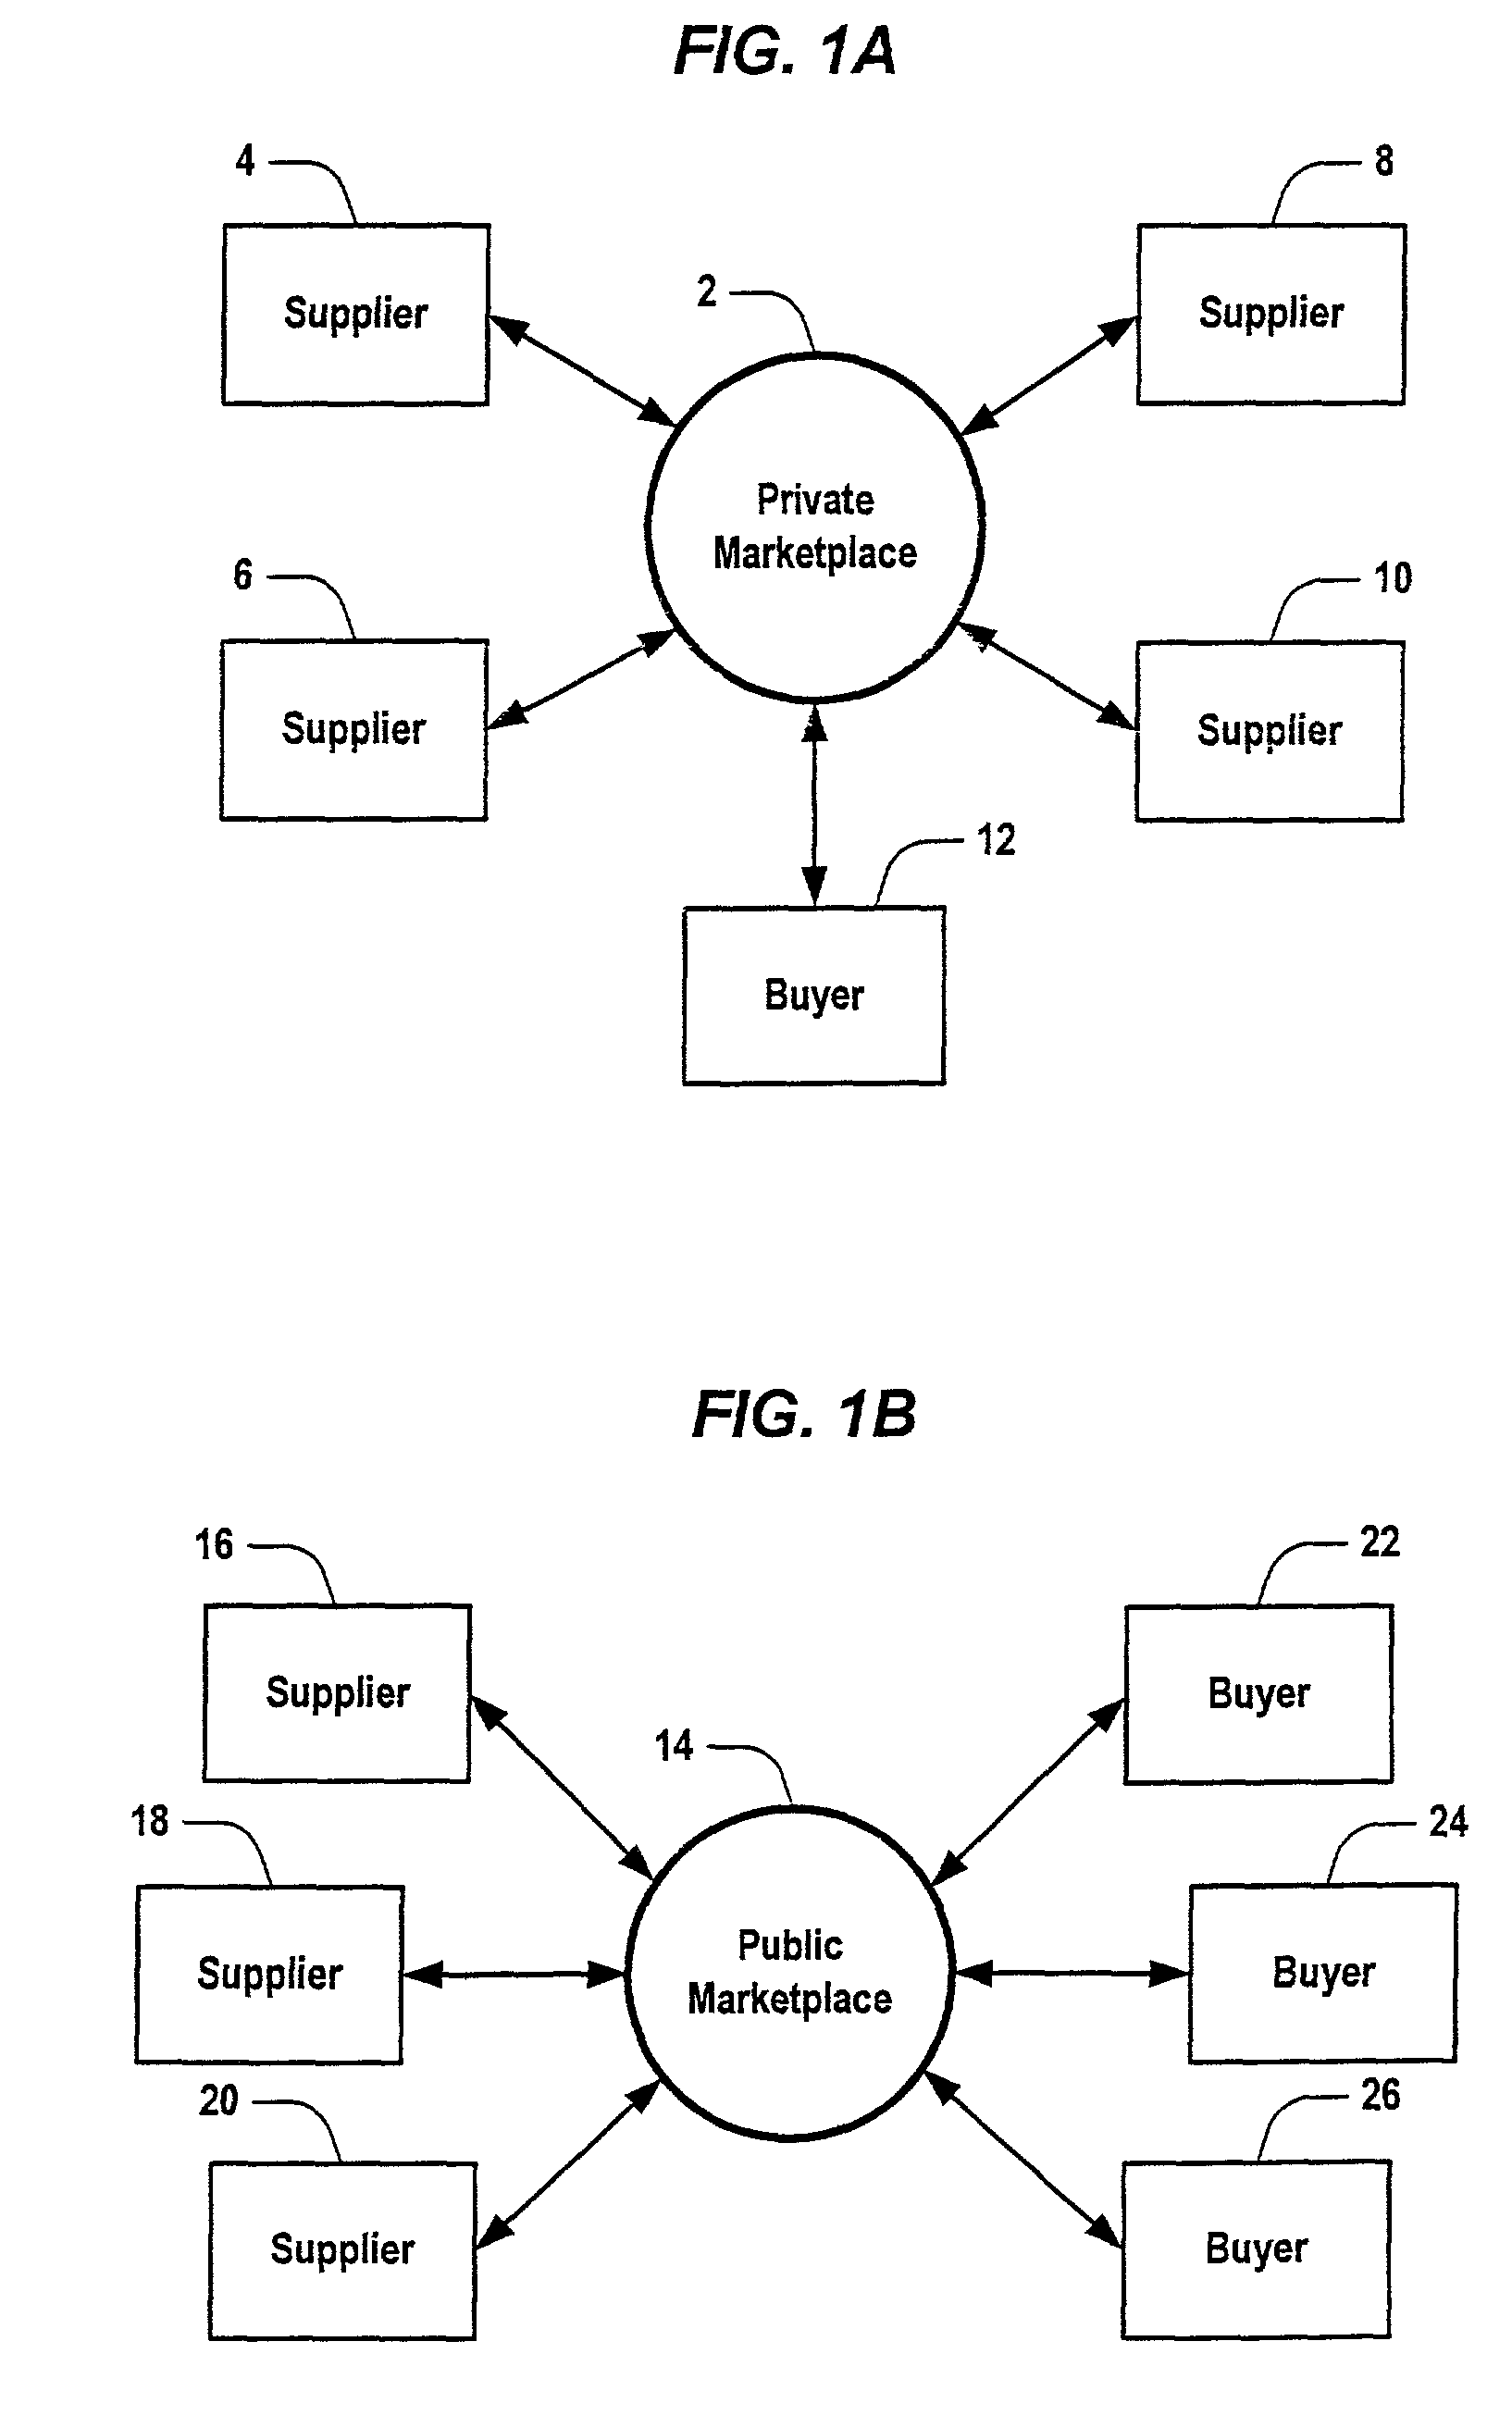 Method for managing a workflow process that assists users in procurement, sourcing, and decision-support for strategic sourcing